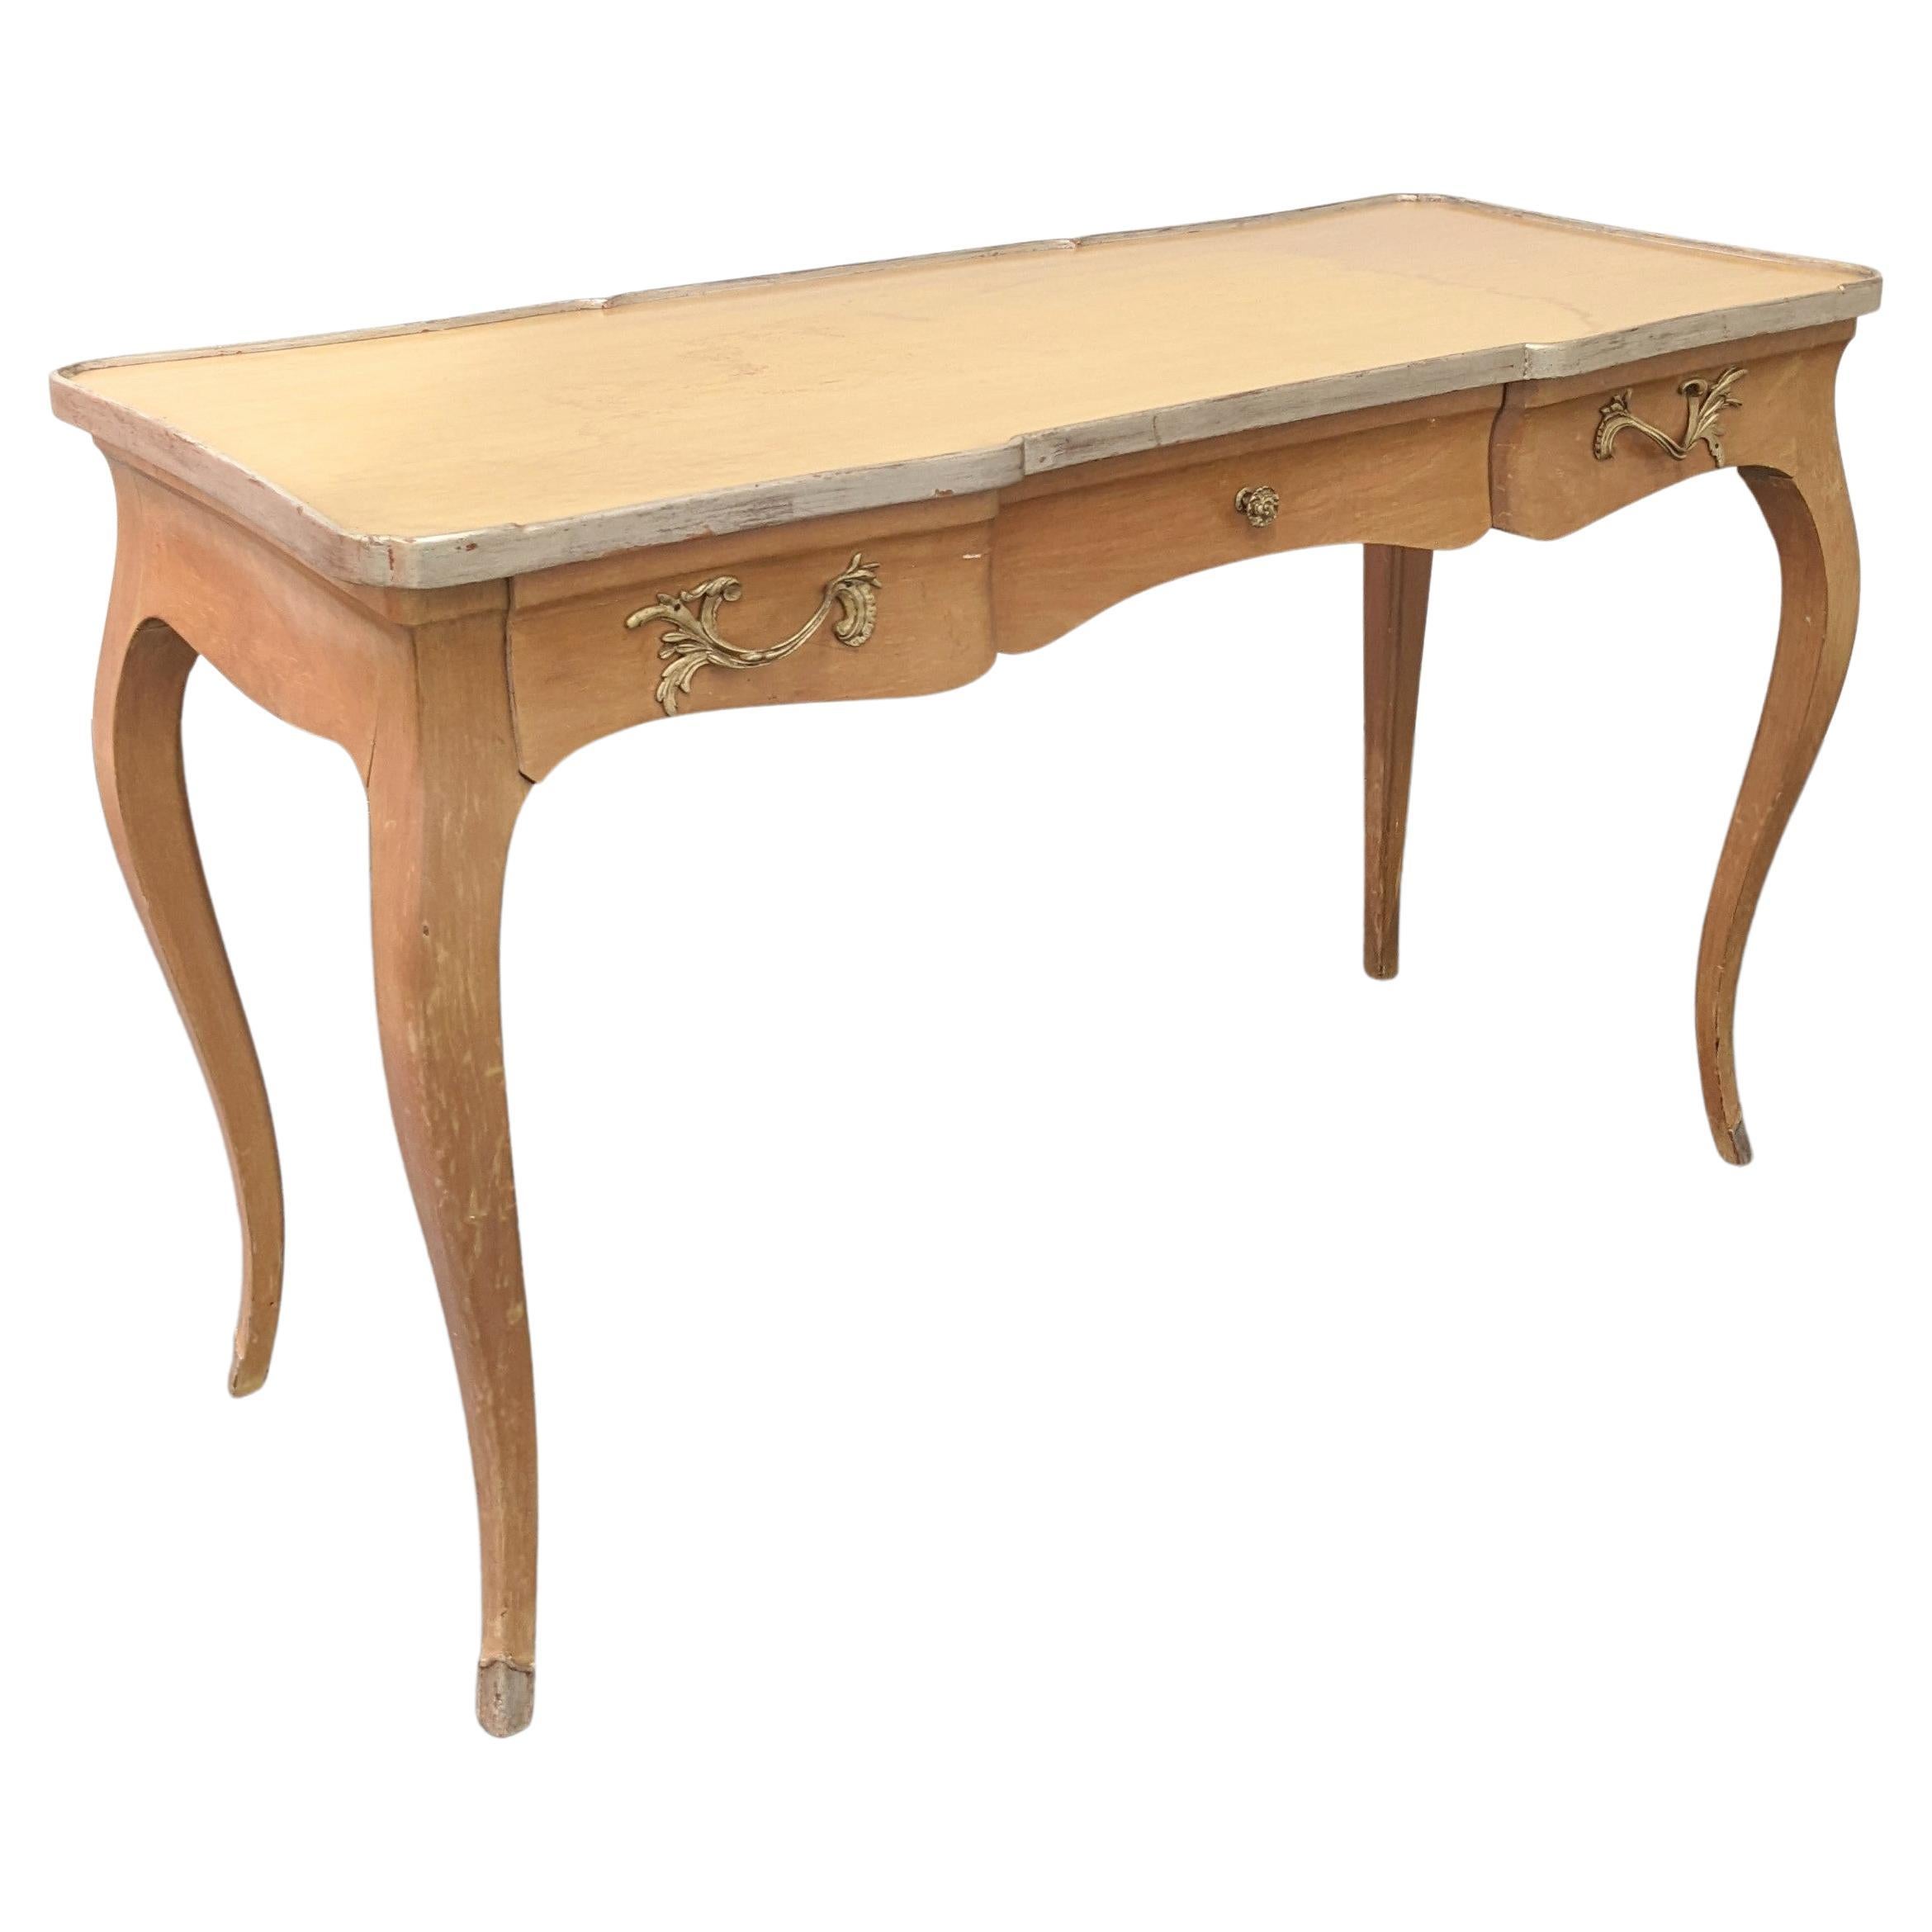 Elegant French style writing desk with Louis XV lines in blond wood with silver leaf-painted table edge and feet. 3 drawers. Fitted glass top included (no image).
Measures: 20